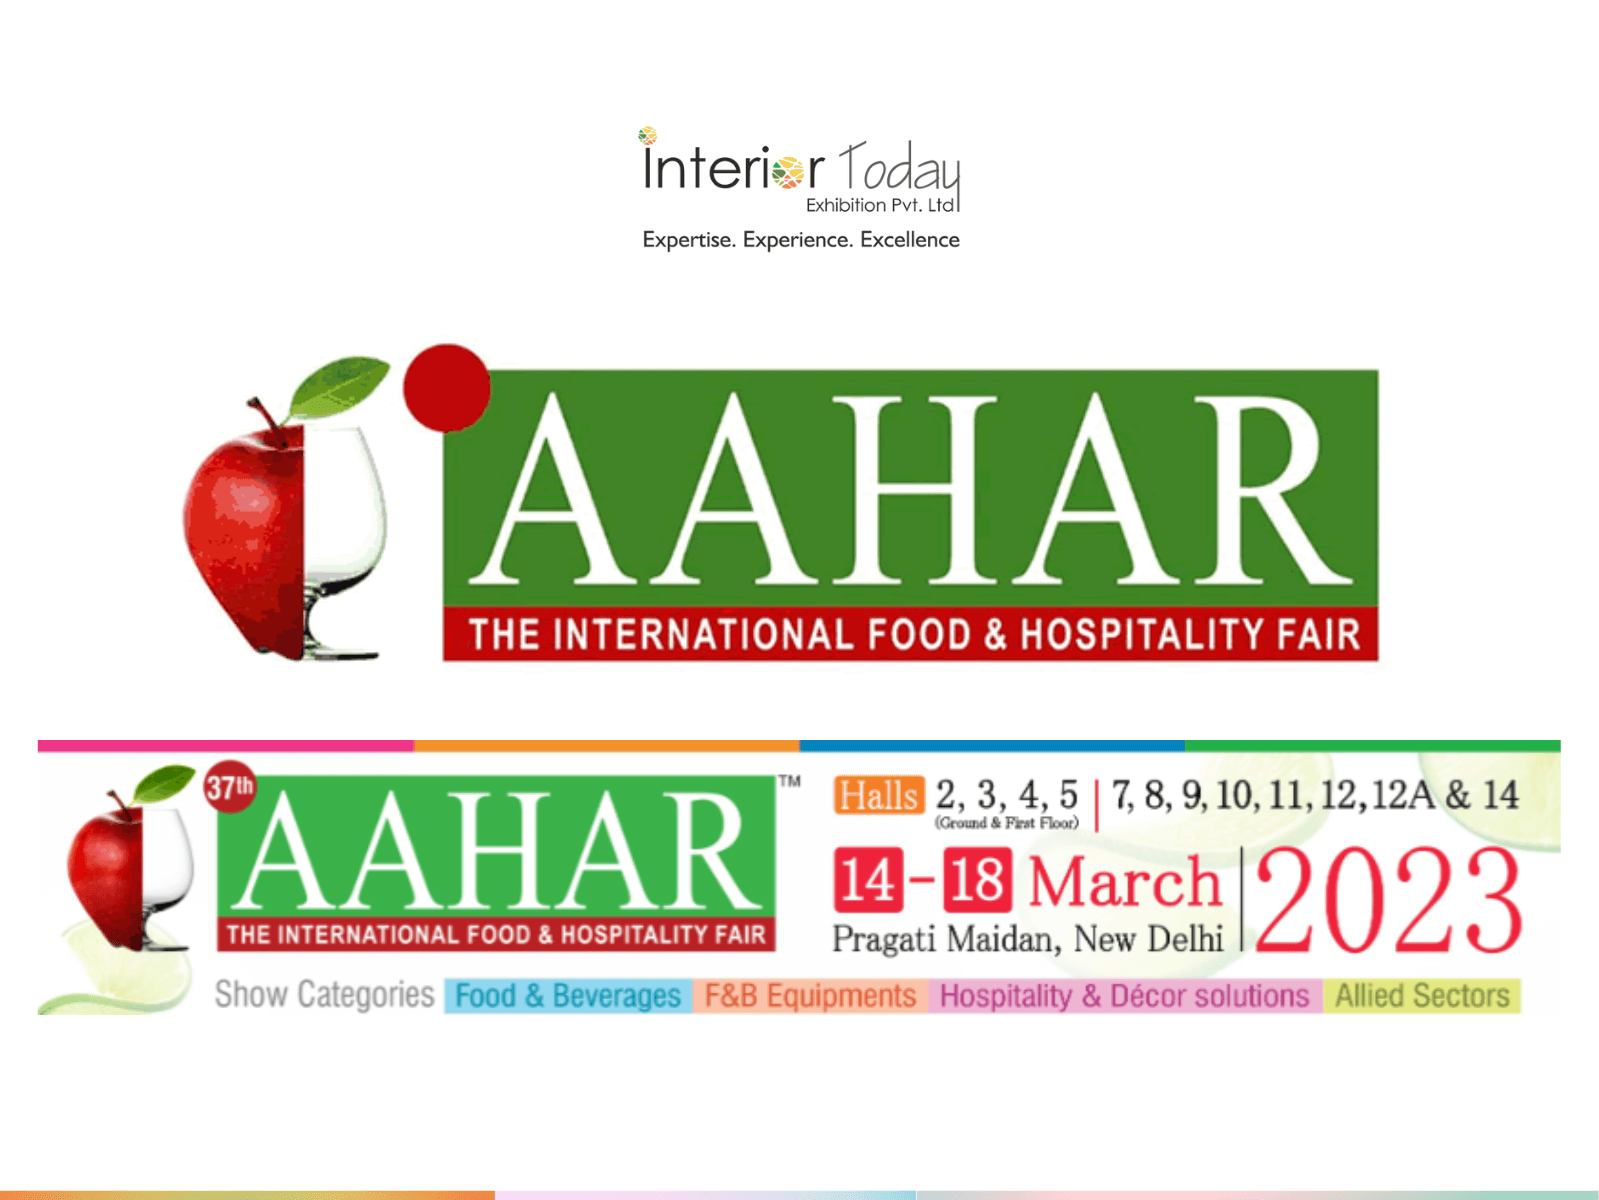 EXHIBITION BOOTH BUILDER & BOOTH DESIGN AAHAR 2023